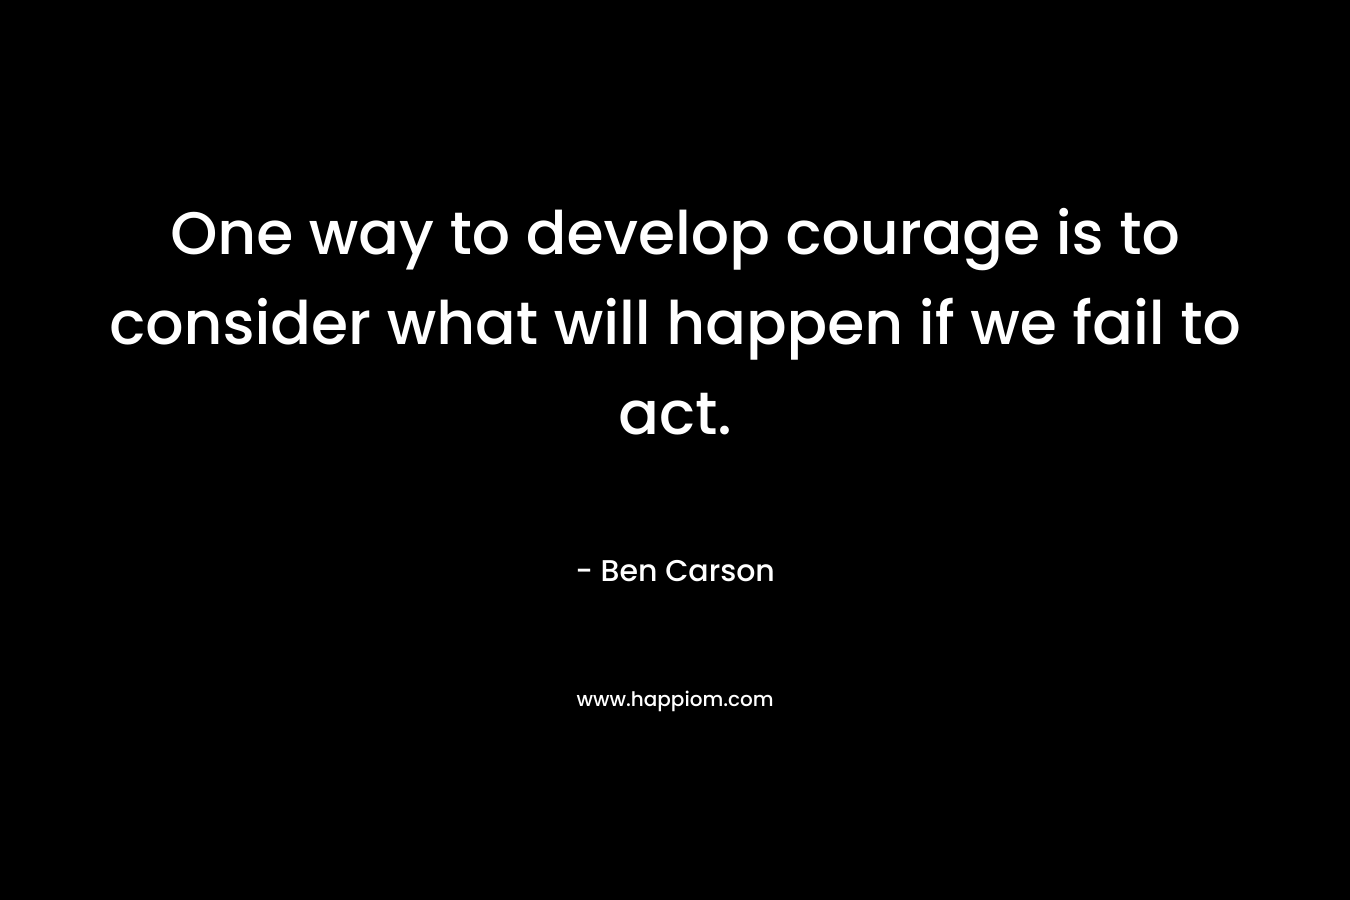 One way to develop courage is to consider what will happen if we fail to act. – Ben Carson